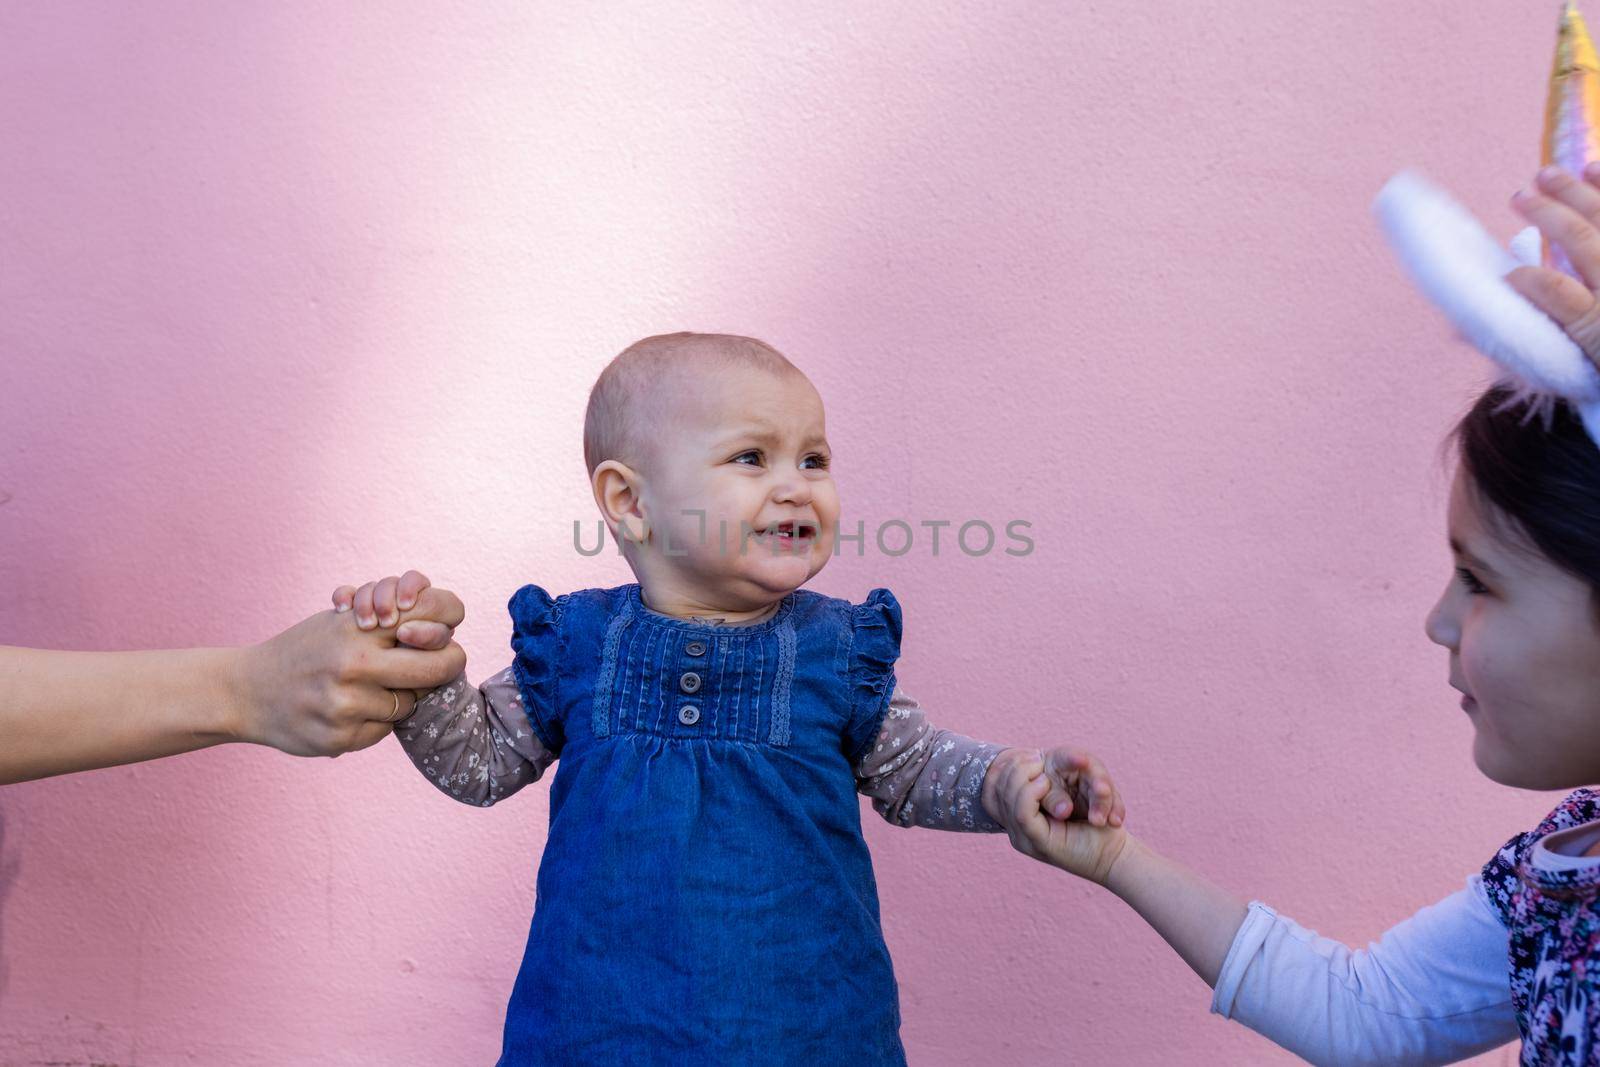 Portrait of woman and little girl holding cute smiling baby by the hands with pink wall as background. Adorable baby standing on sidewalk between her mother and older sister. Happy family outdoors